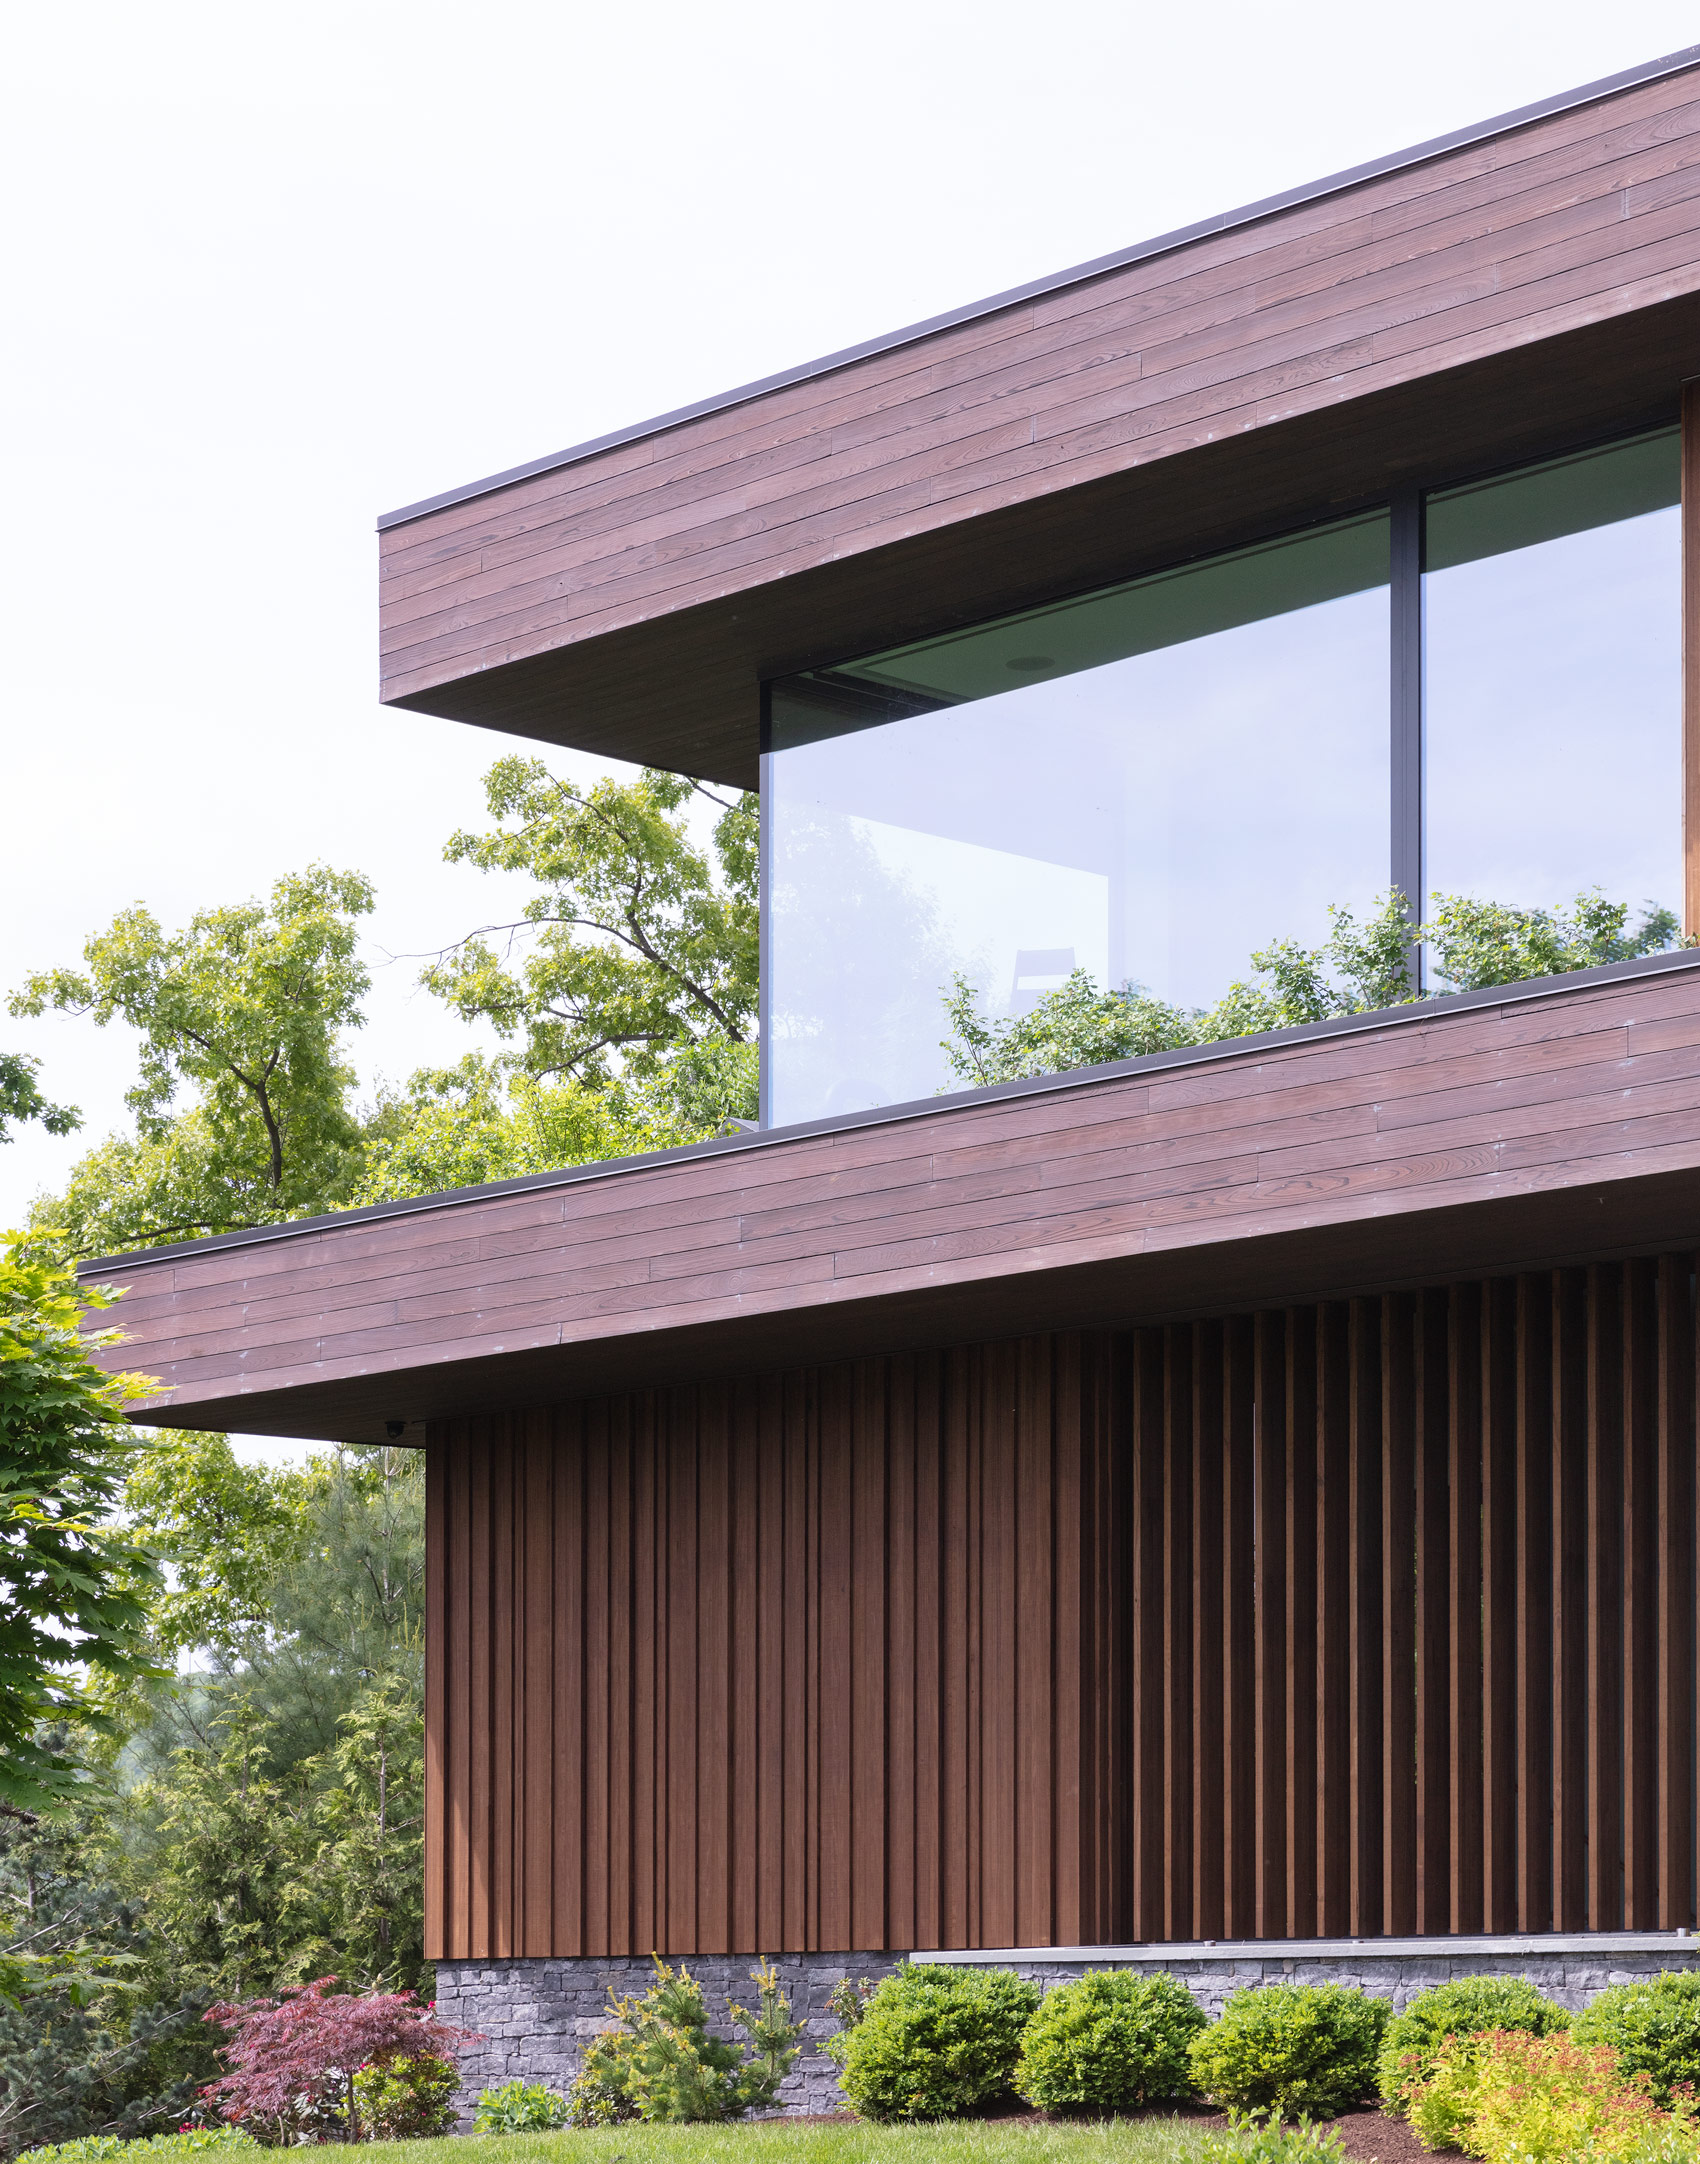 New Fairfield Lake House featuring reSAWN TIMBER co. TEAK Abodo Vulcan Cladding and PONZU Shou Sui Ban Charred Cypress